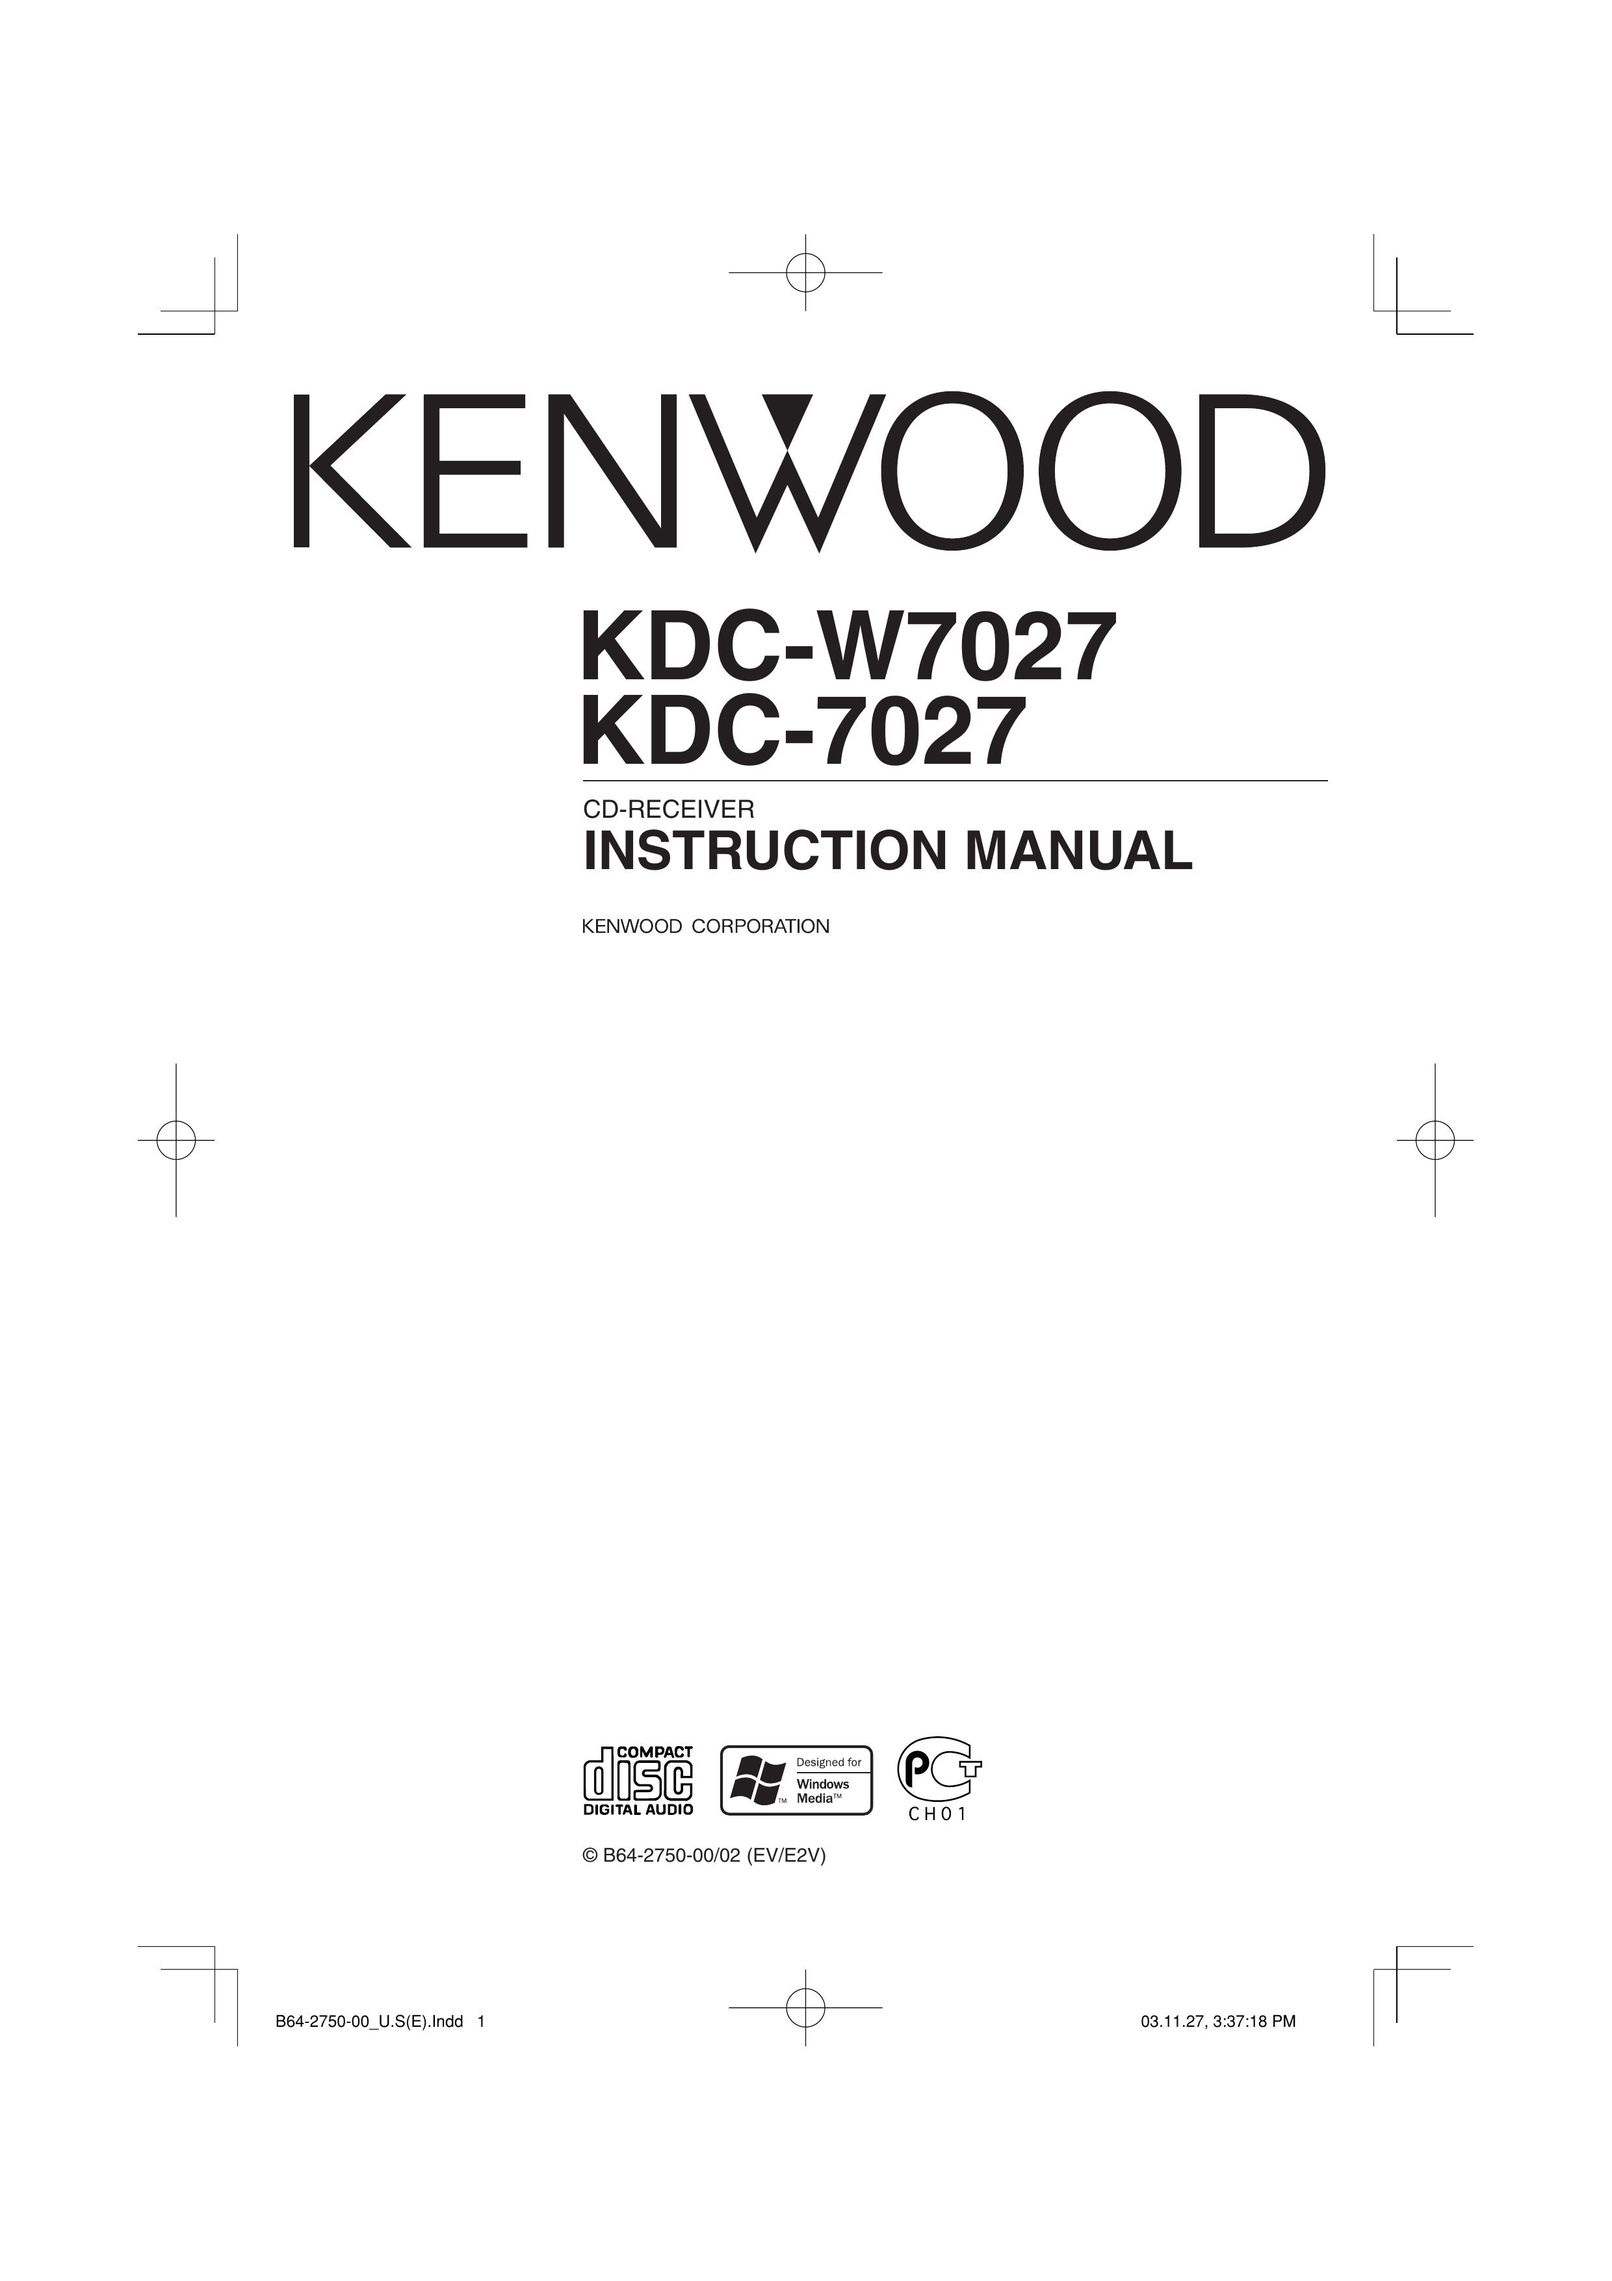 Disc Makers KDC-7027 Car Stereo System User Manual